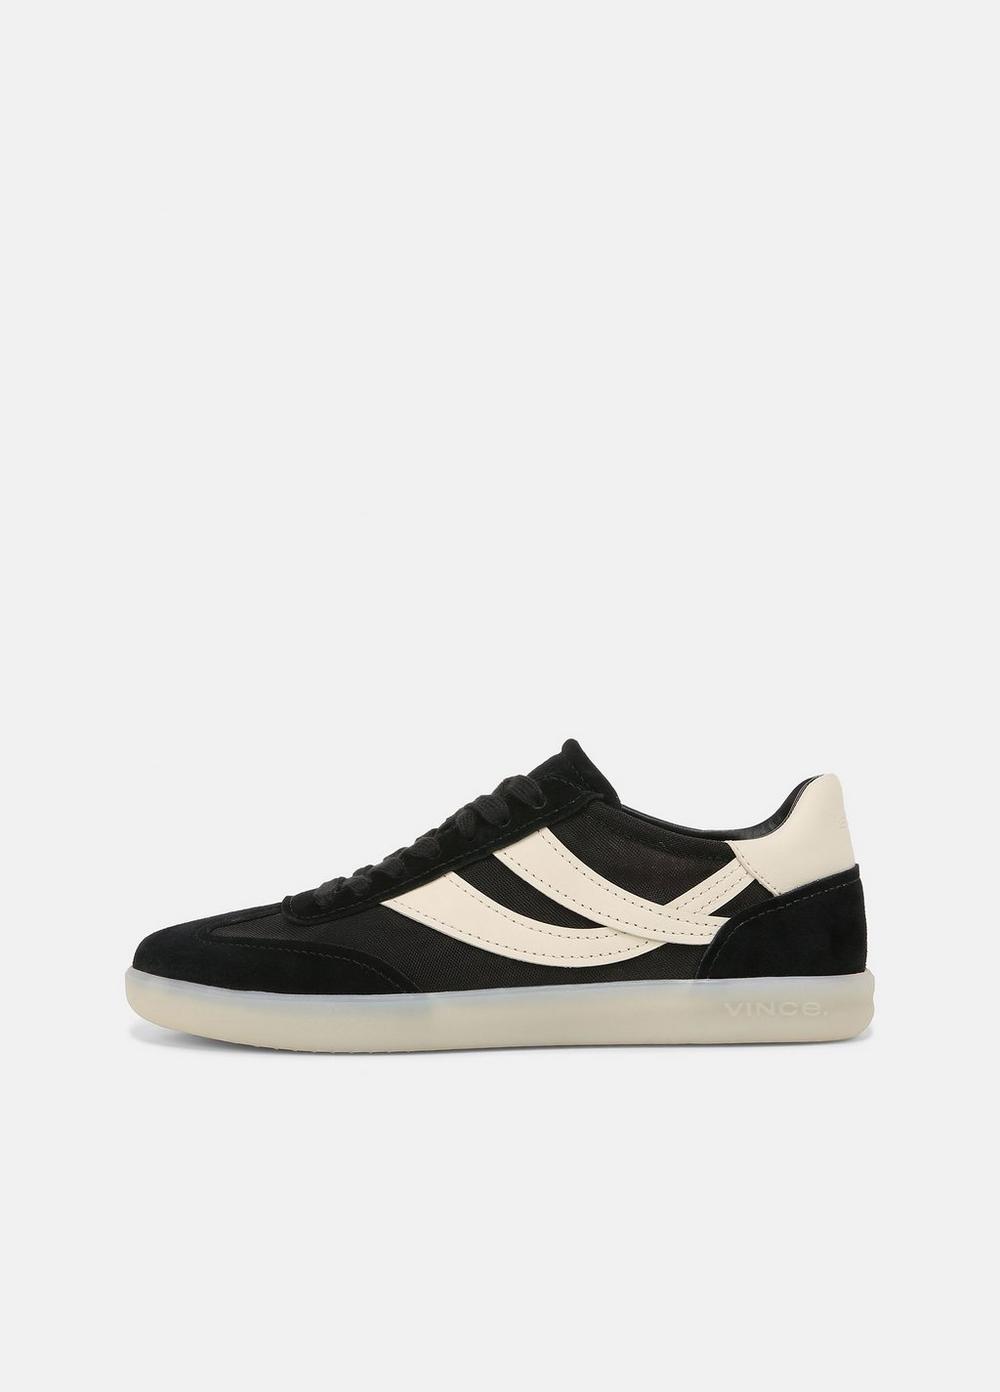 Oasis Leather And Suede Sneaker, Black, Size 5.5 Vince